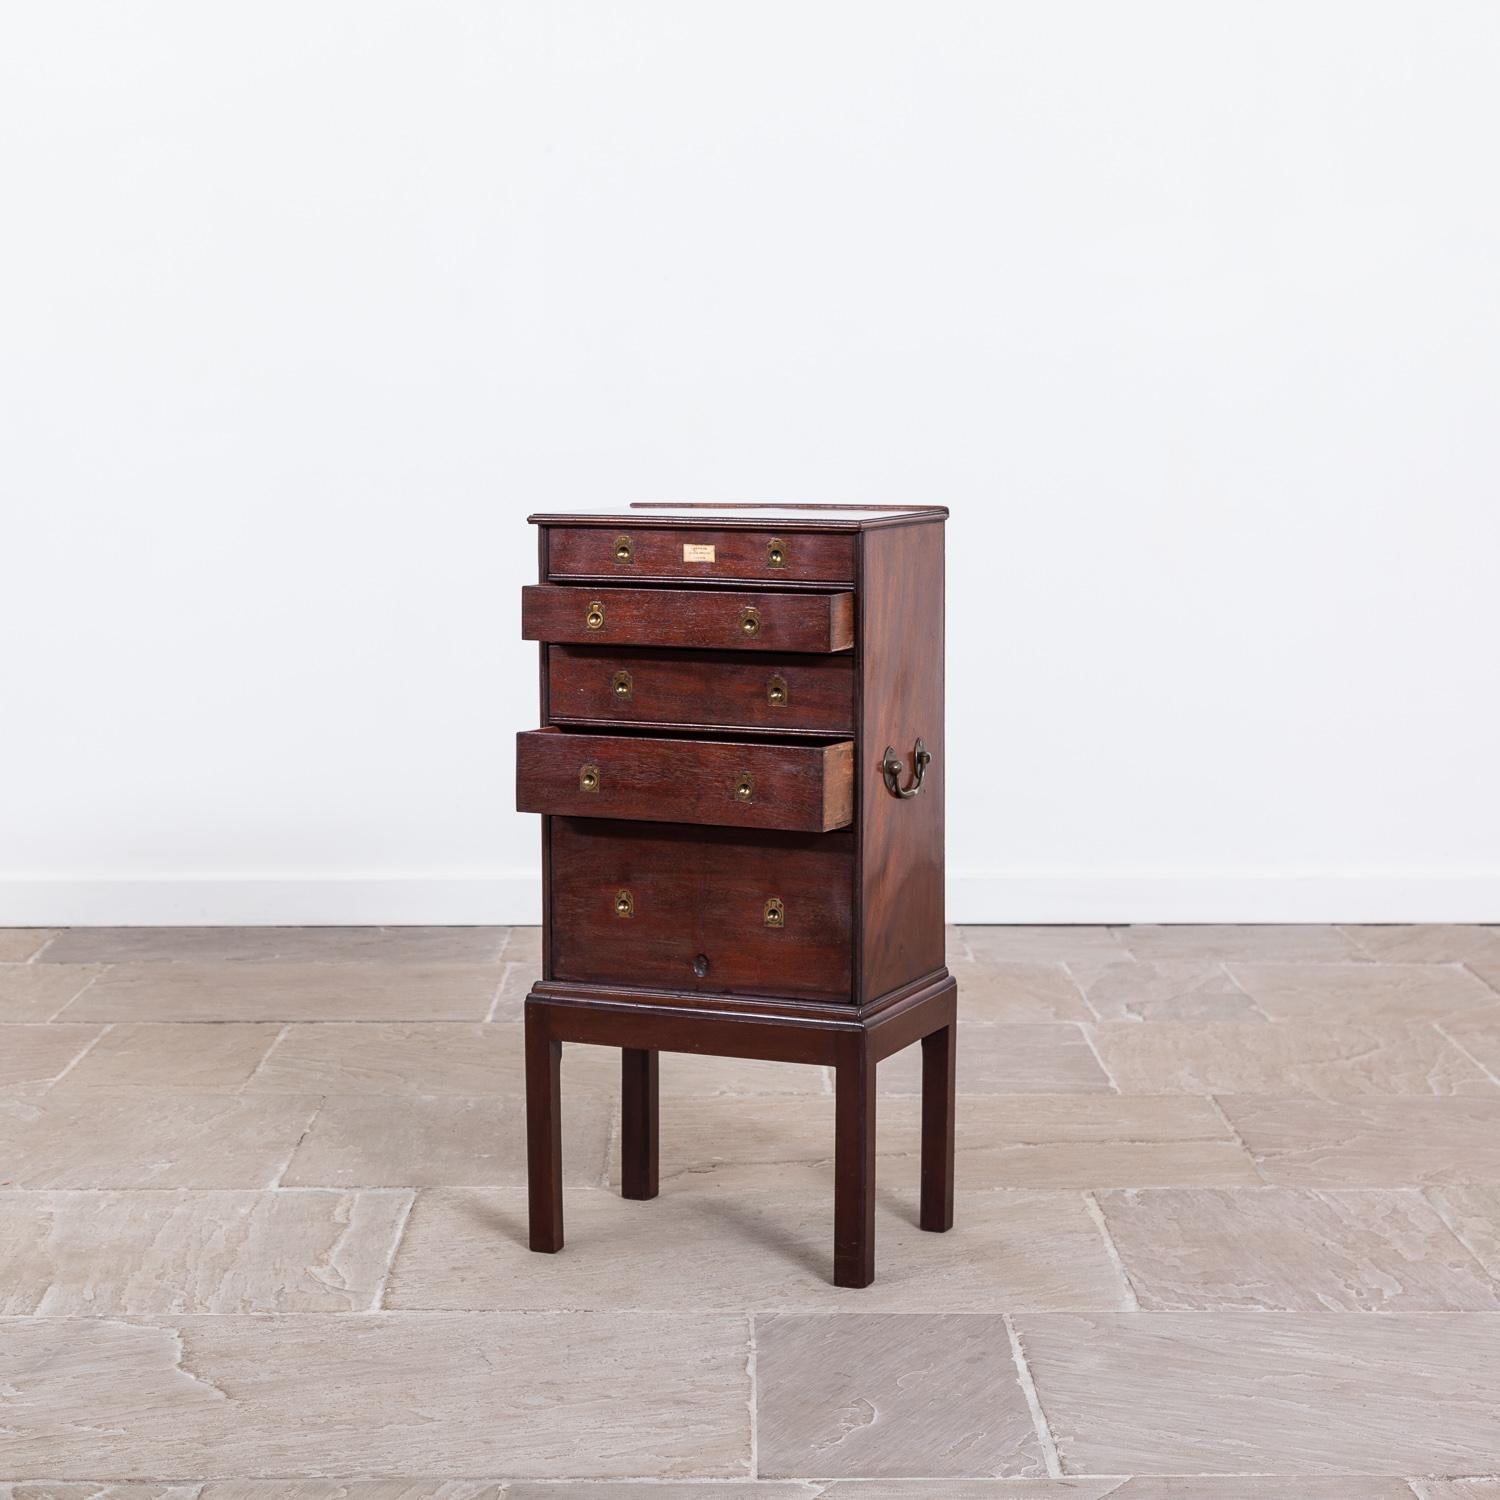 Early 19th Century Small Mahogany Chest on Stand im Zustand „Gut“ in York, GB